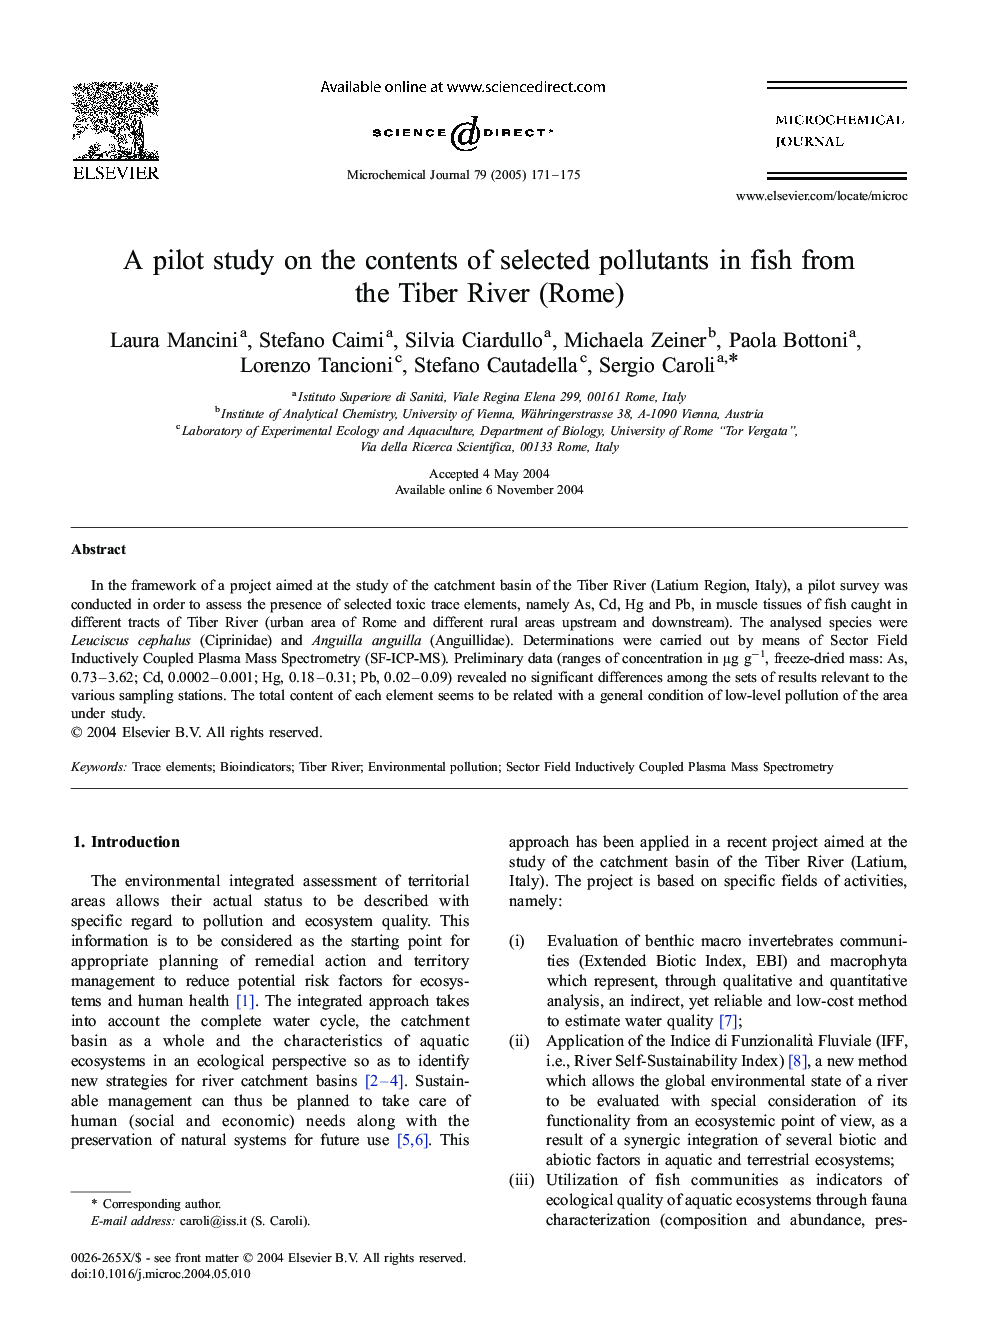 A pilot study on the contents of selected pollutants in fish from the Tiber River (Rome)